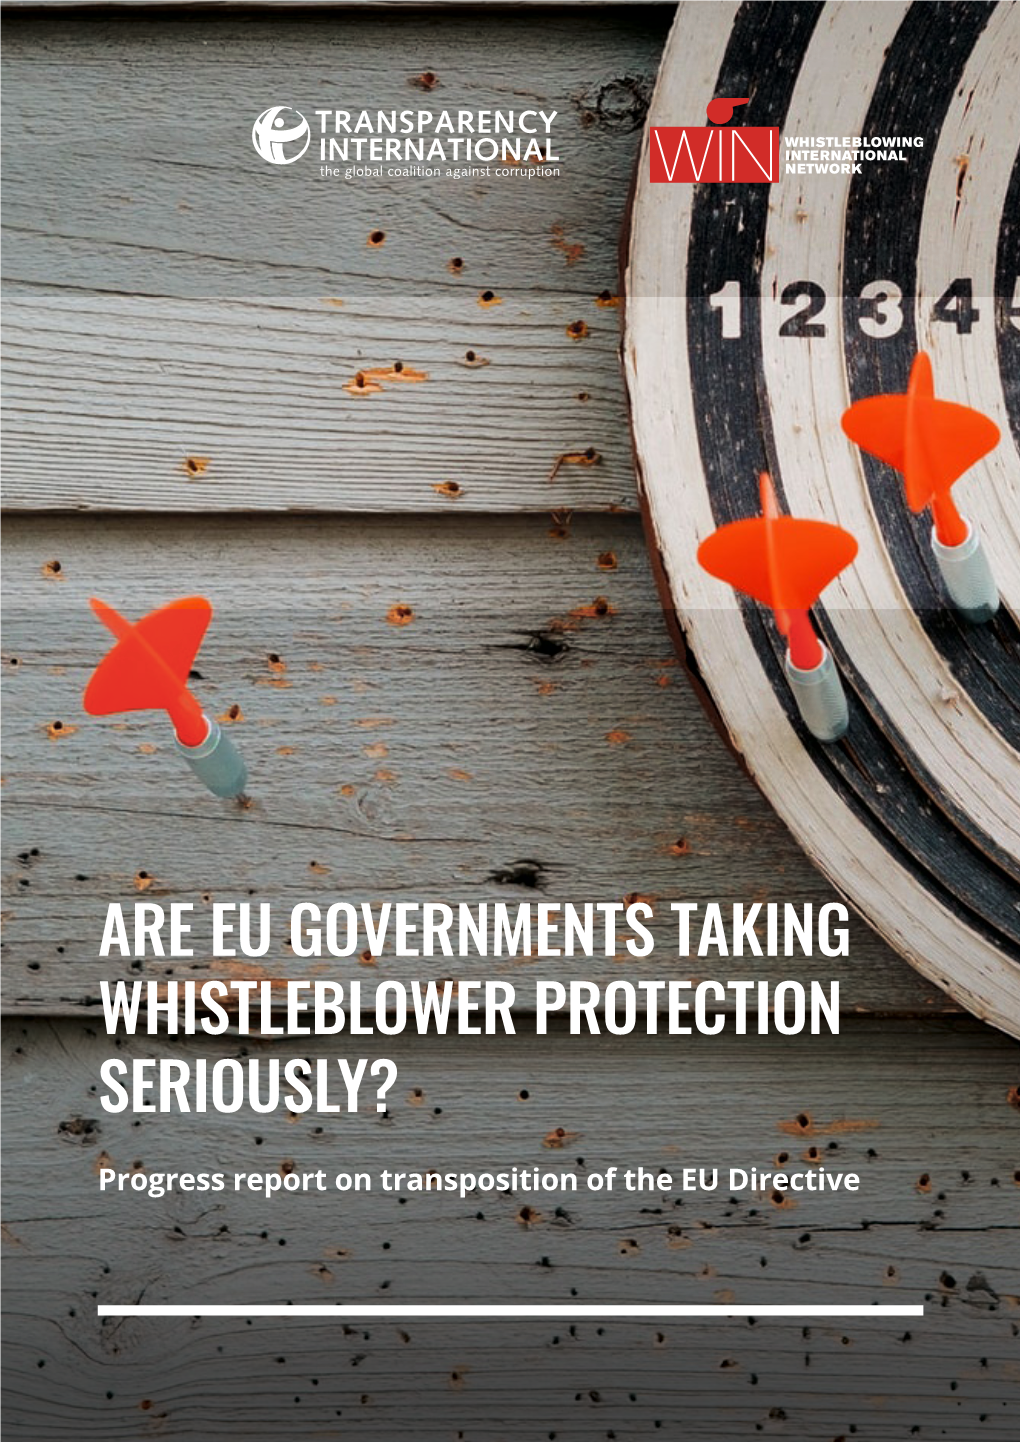 Are Eu Governments Taking Whistleblower Protection Seriously?